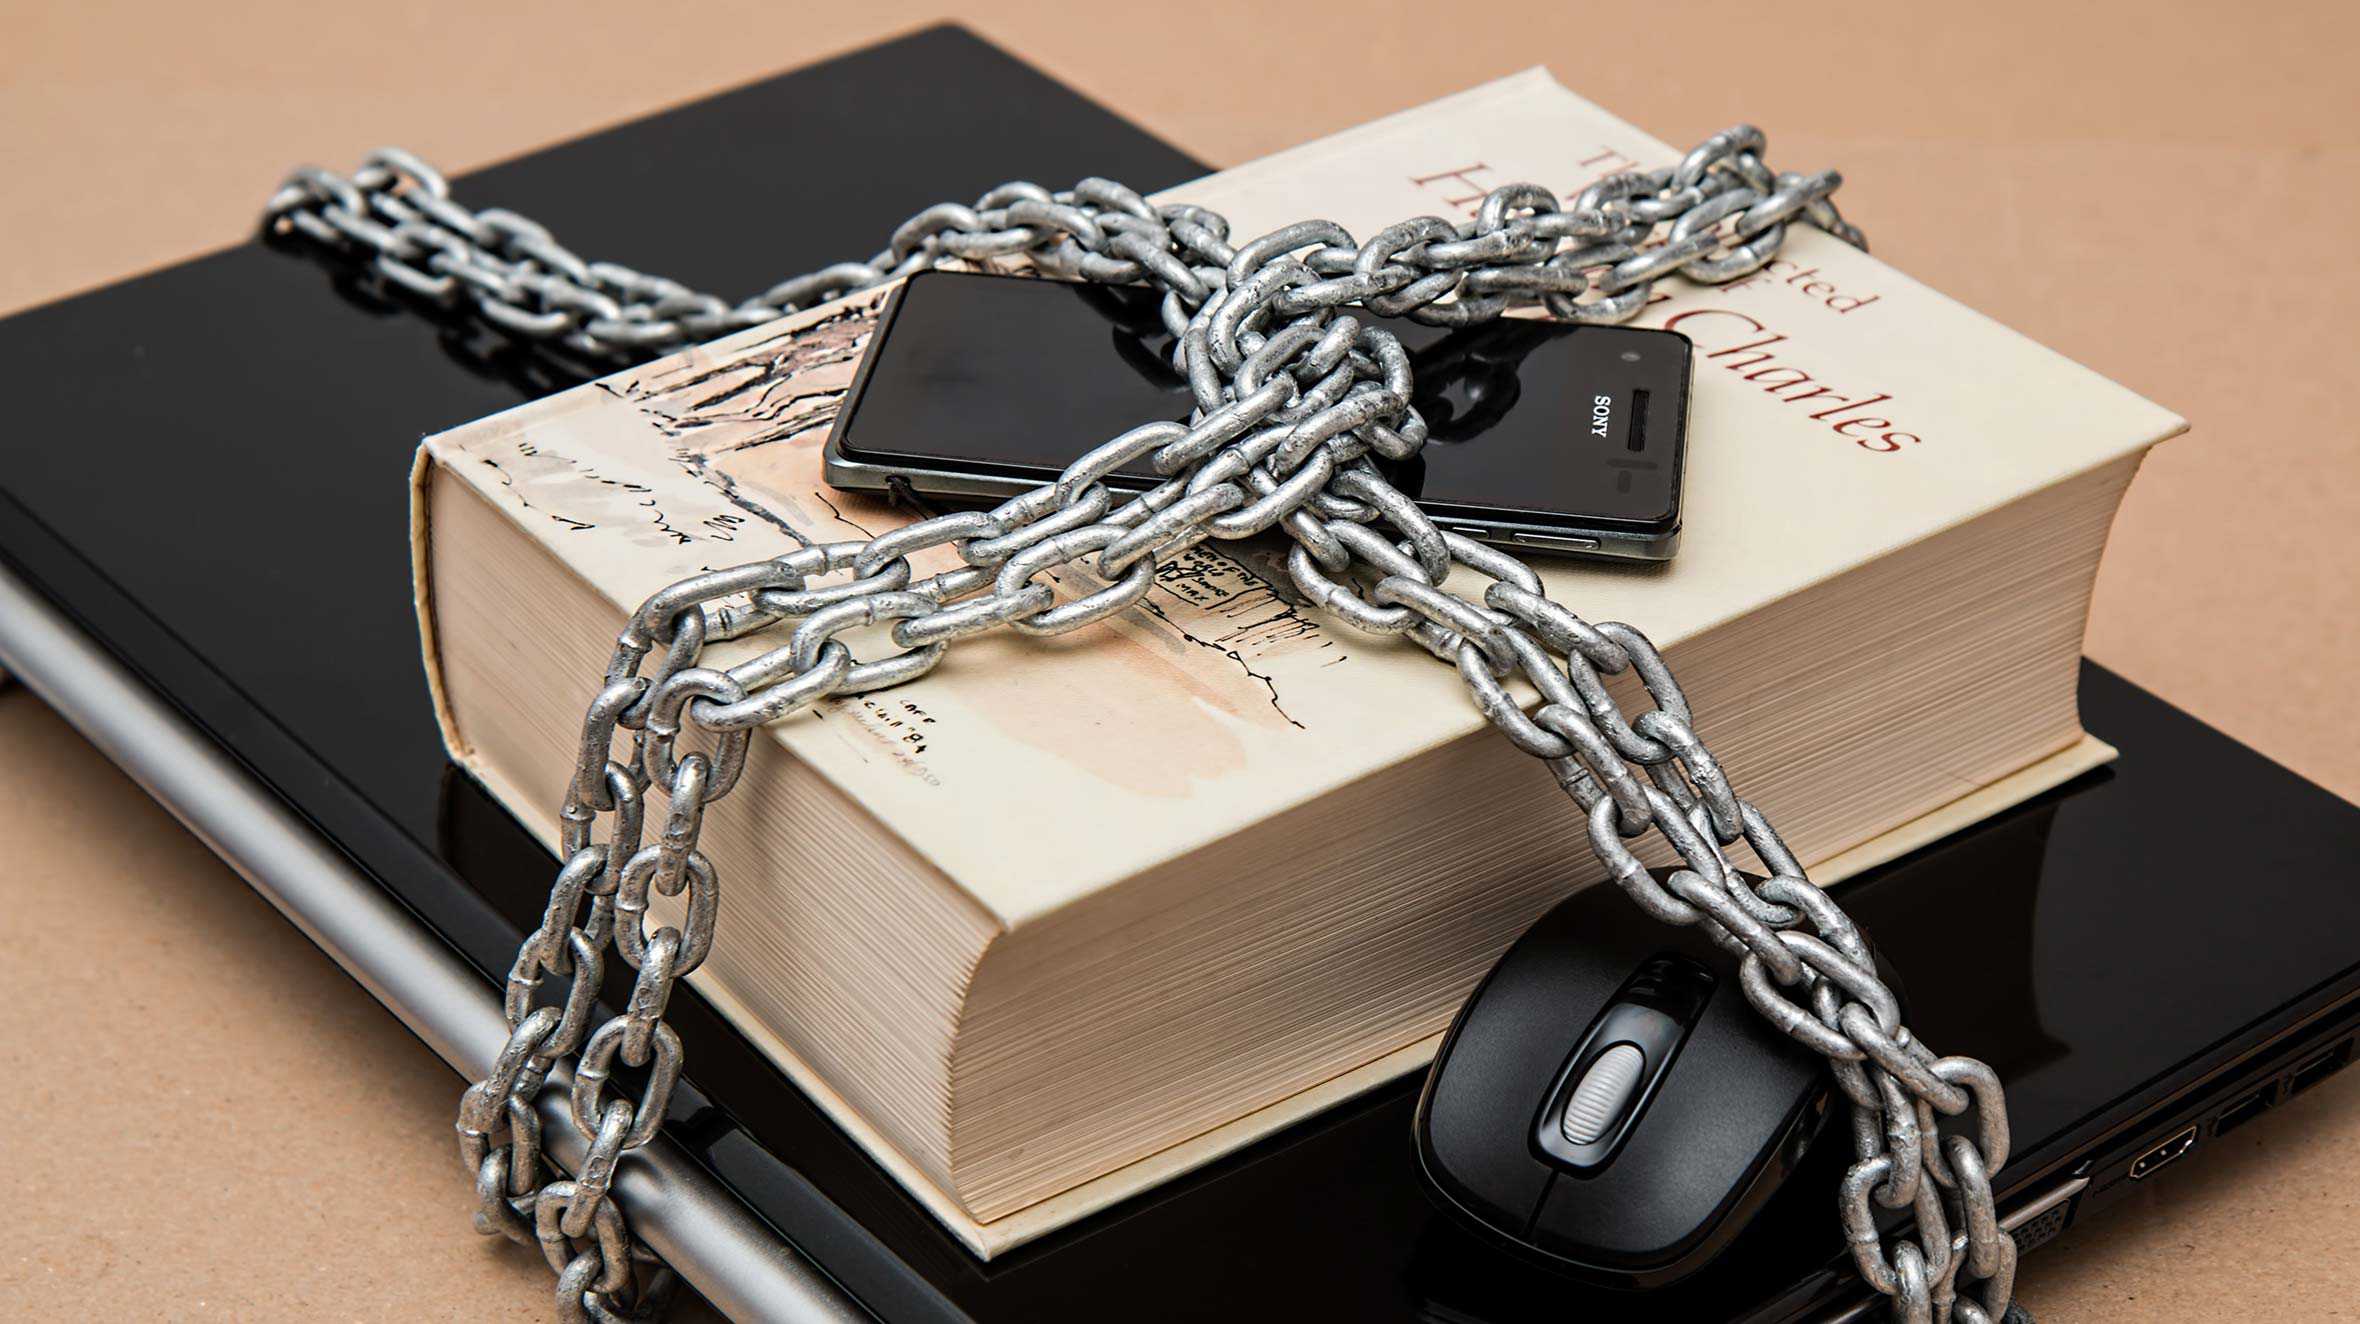 A laptop, book and mobile phone, locked up with a heavy chain and padlock.